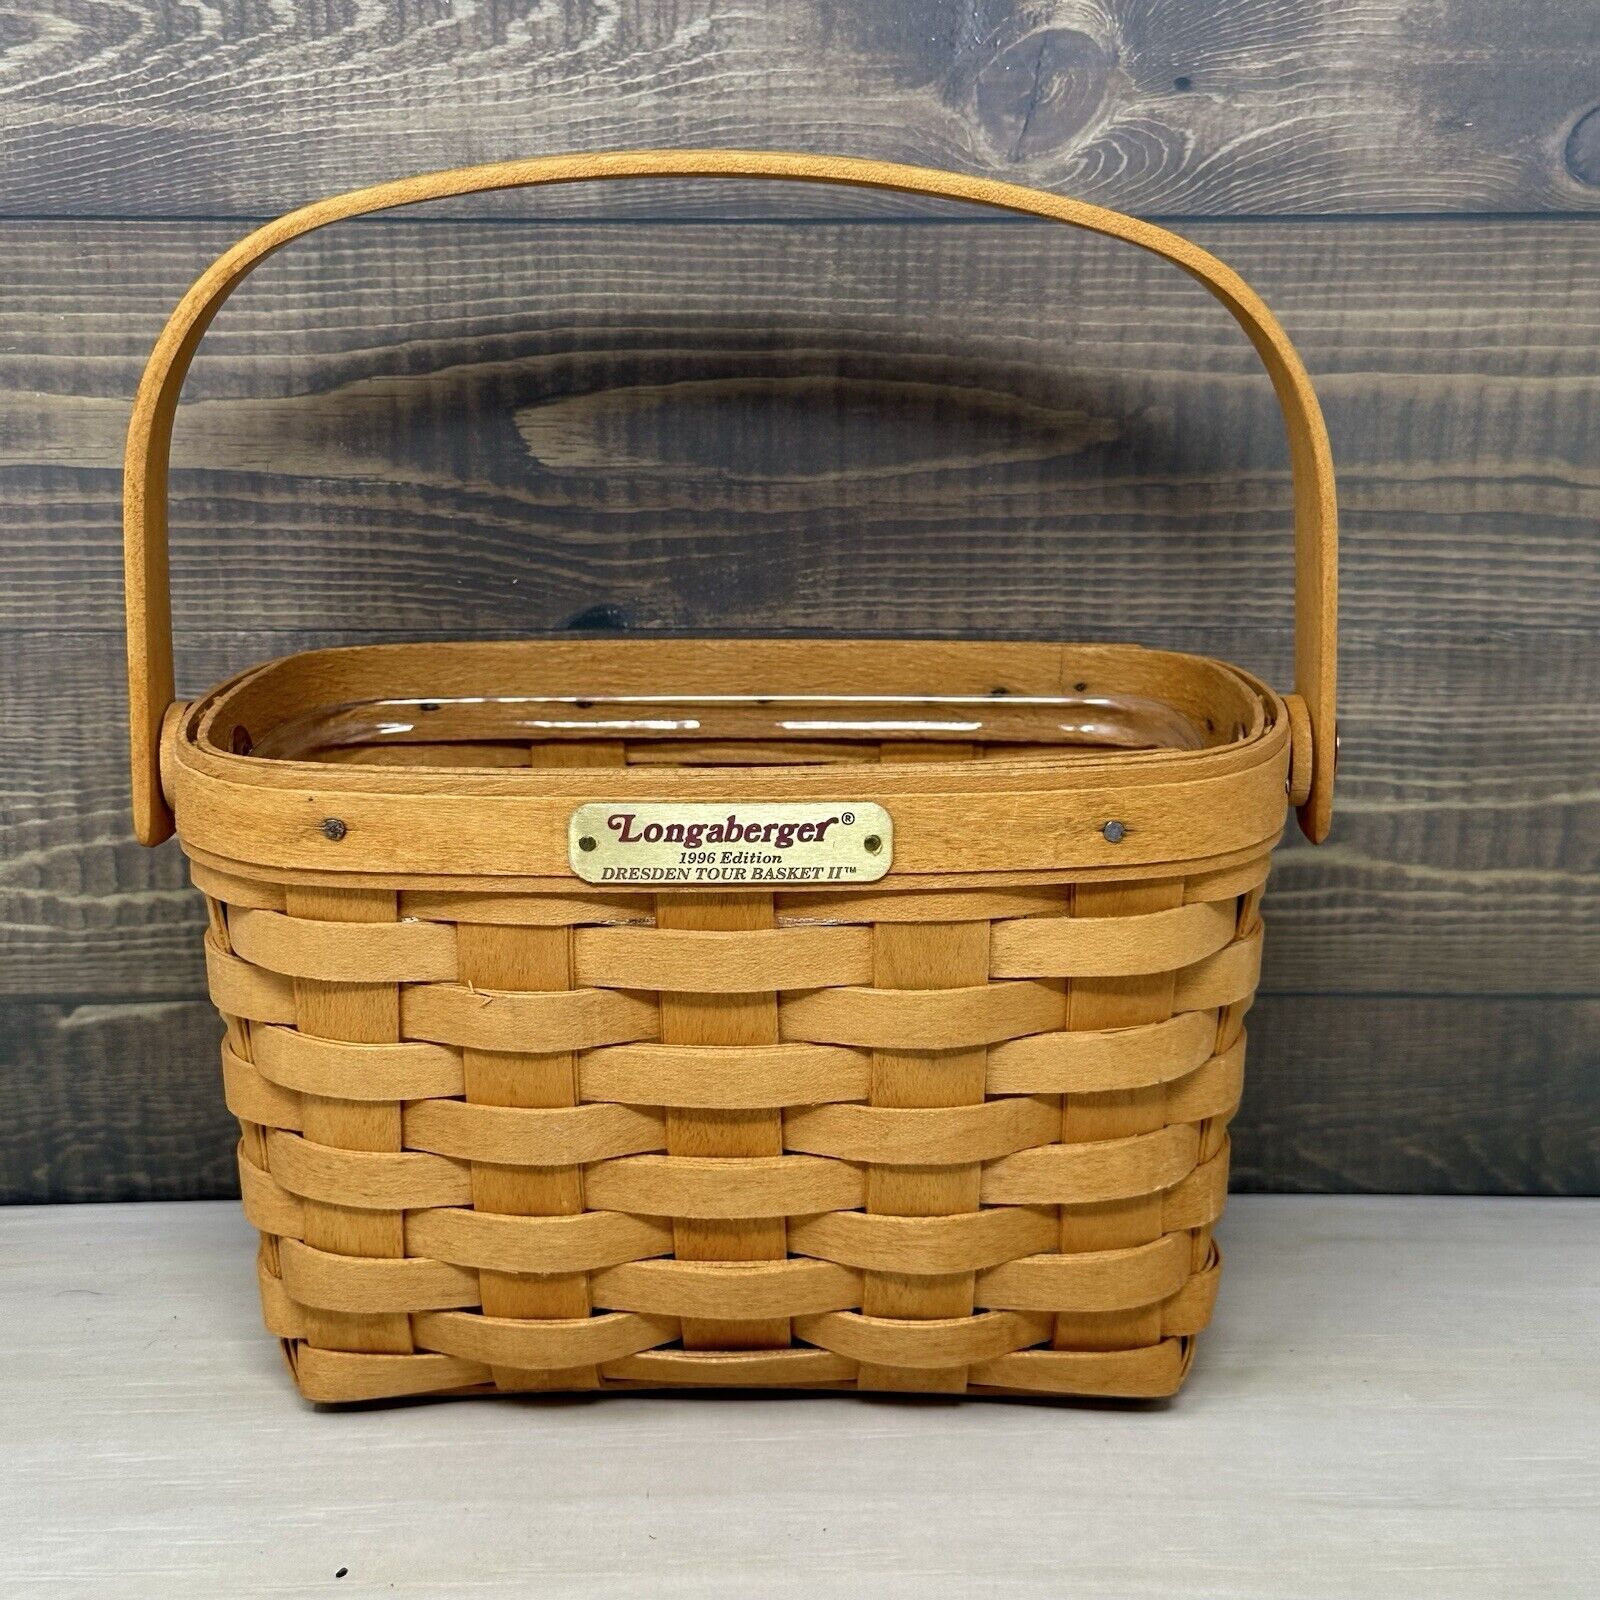 1996 Longaberger Dresden Tour Basket II with Swing Handle Plastic Protector